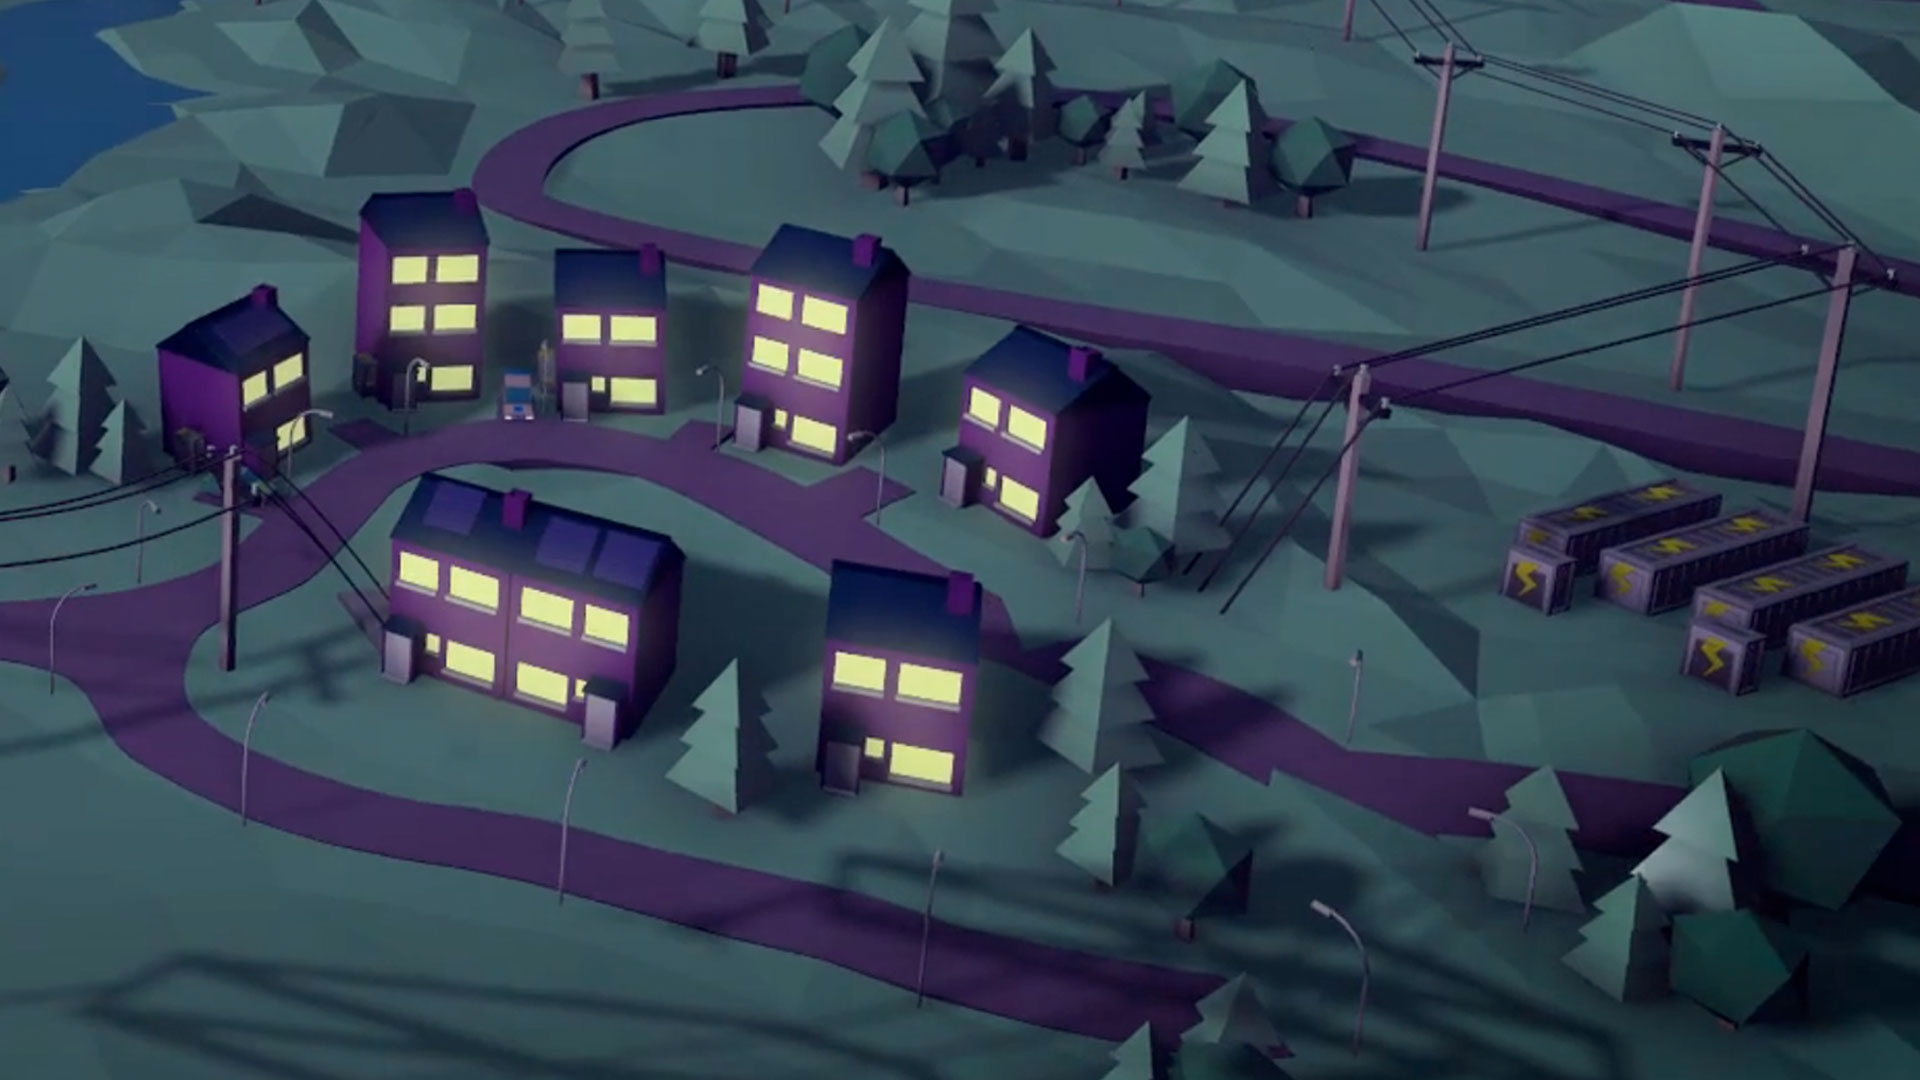 Night time low poly street scene from video